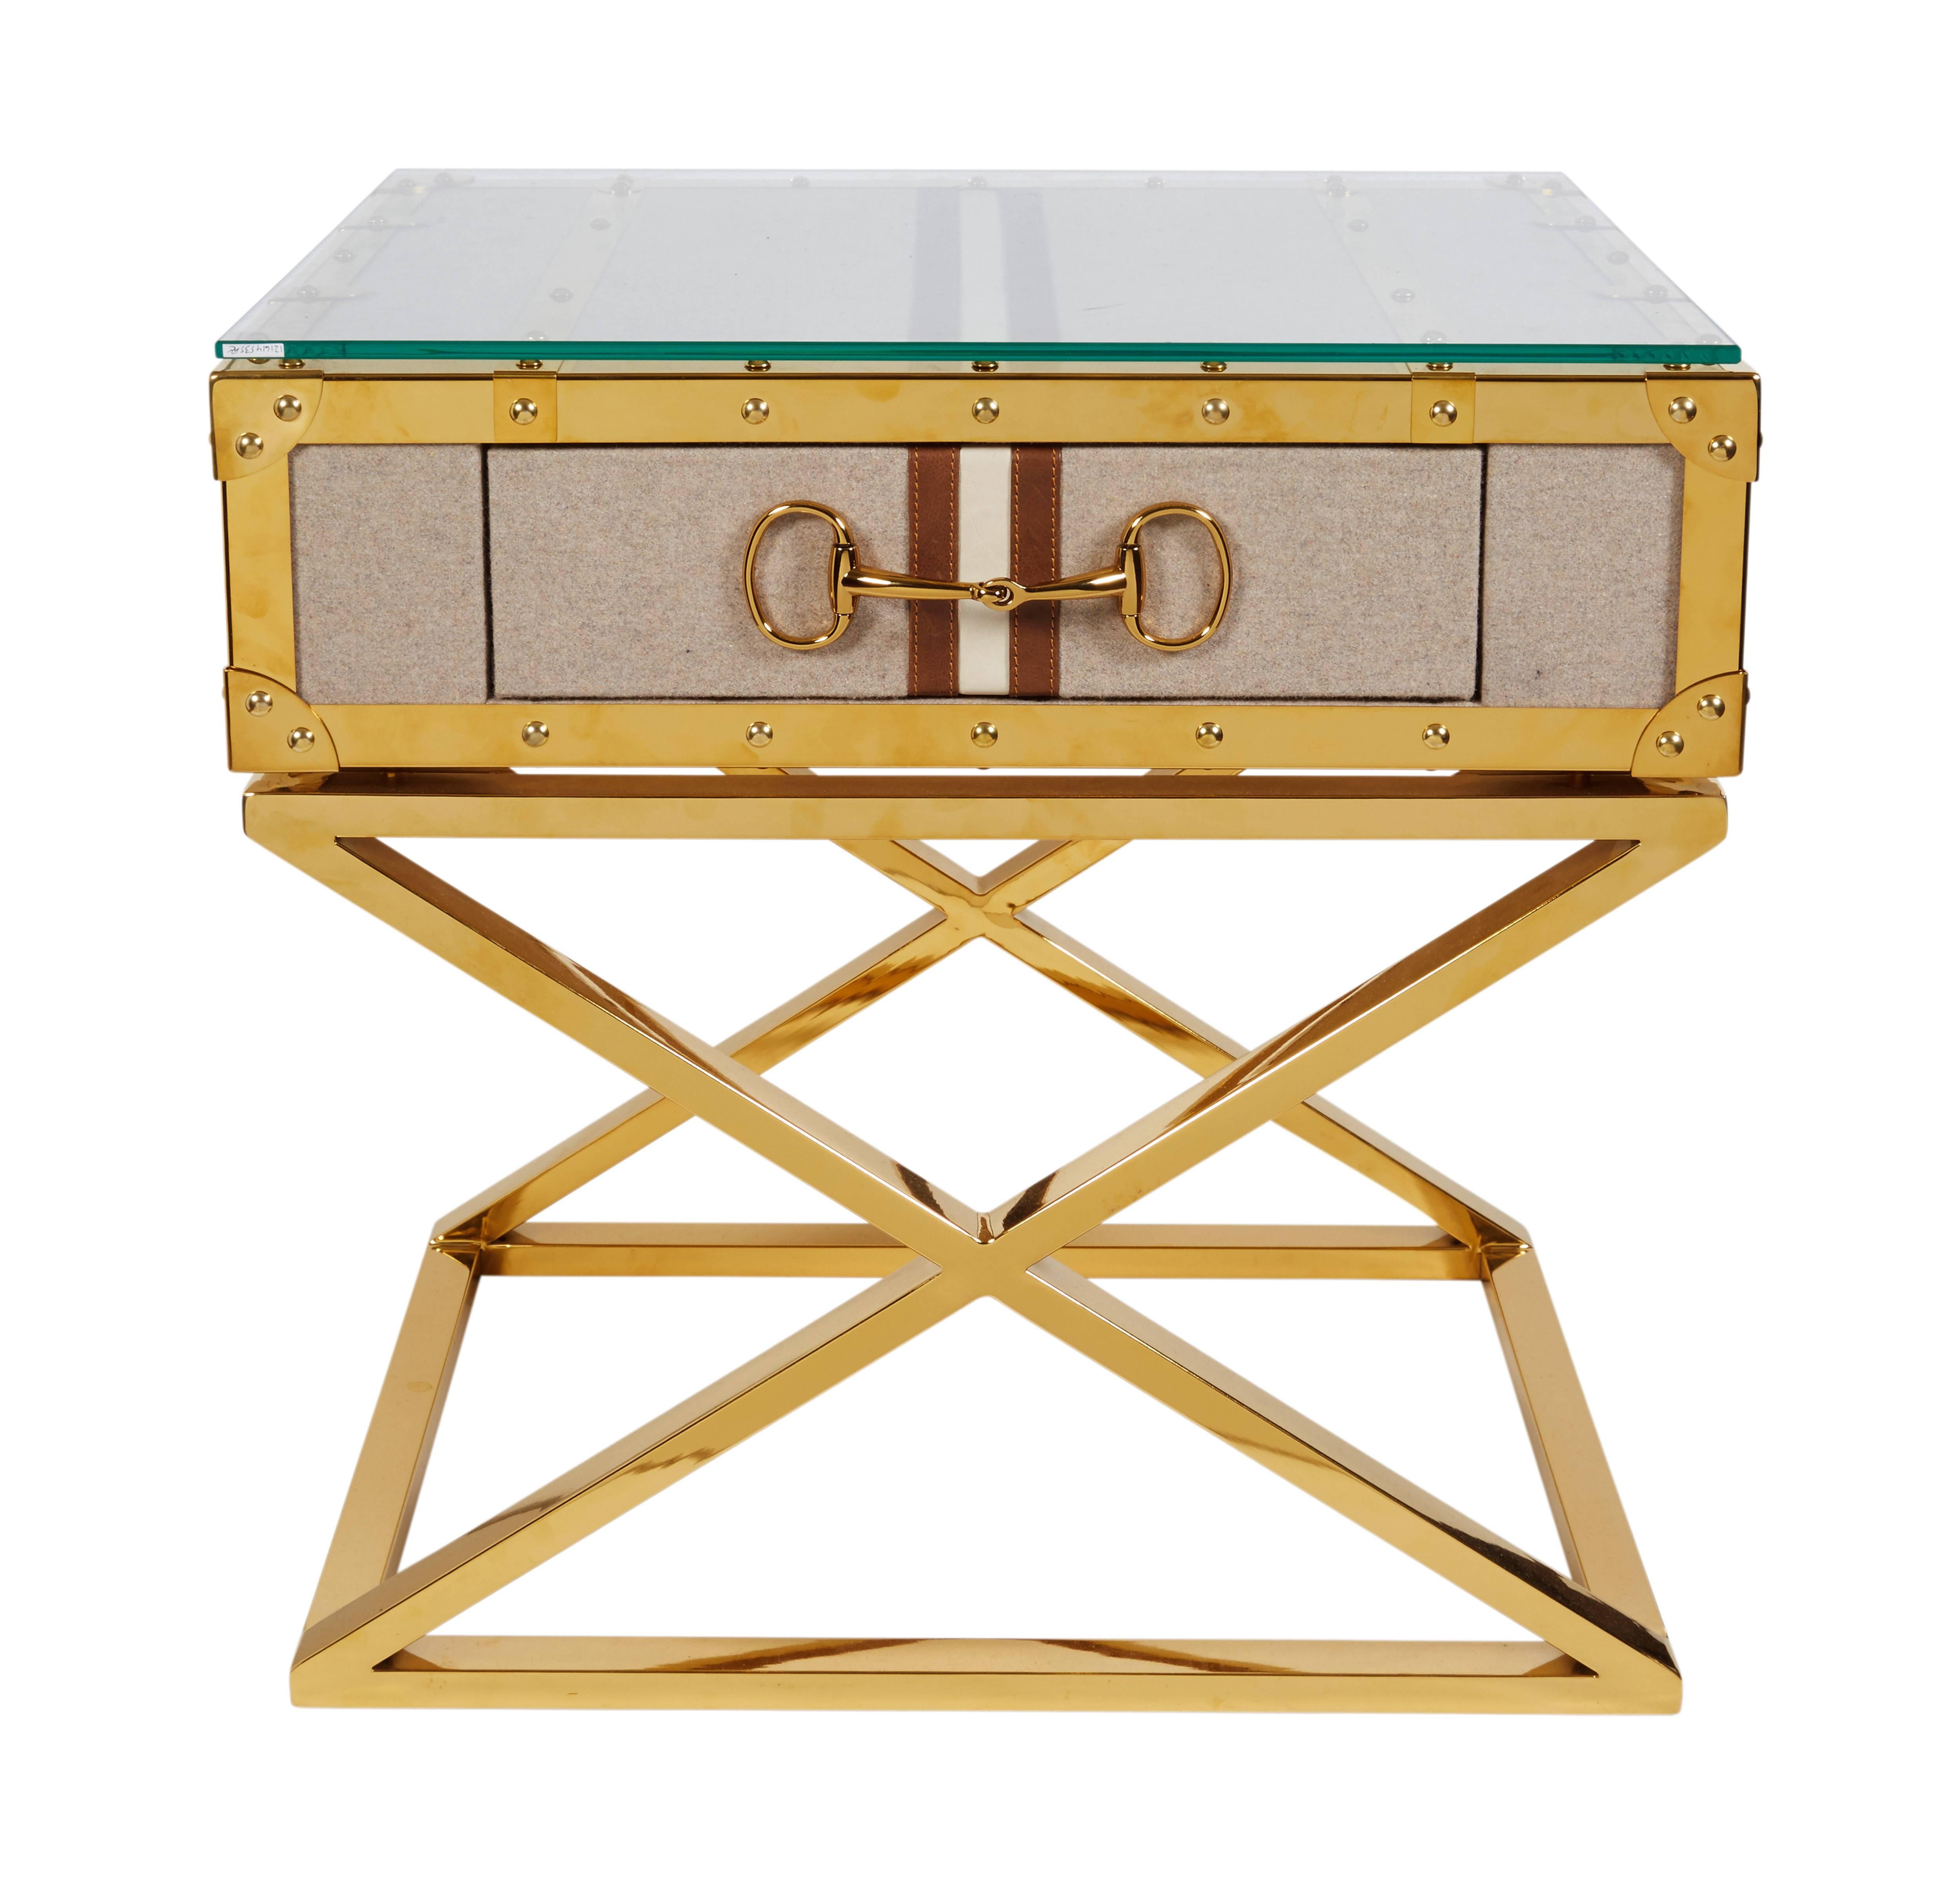 Pair of contemporary / modern Gucci inspired polished brass side tables or nightstands.

Very high quality.

circa 2000-2002.

Made from polished brass, felt, stitched leather and oak interior.